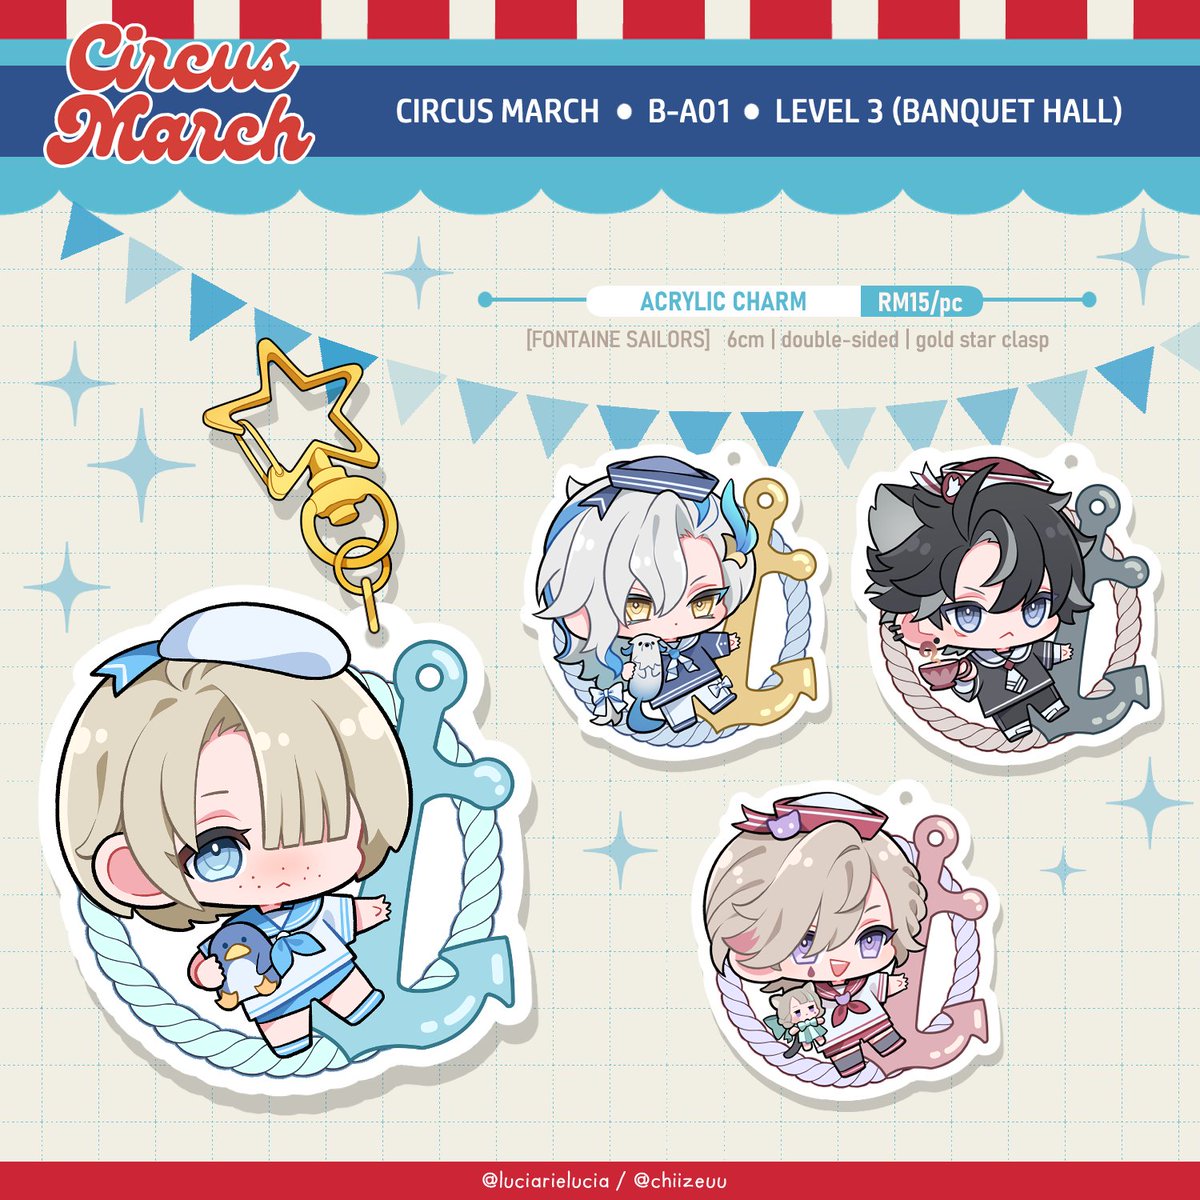 🐥COMIC FIESTA 2023 CATALOGUE✨
Hi hi~ It's Chii~ 🥺 I don't have many to offer but these are my stuff this year. I'm at Circus March (basic artbooth) B-A01 Lv.3 Banquet Hall. See you this weekend! 1/3
#ComicFiesta2023